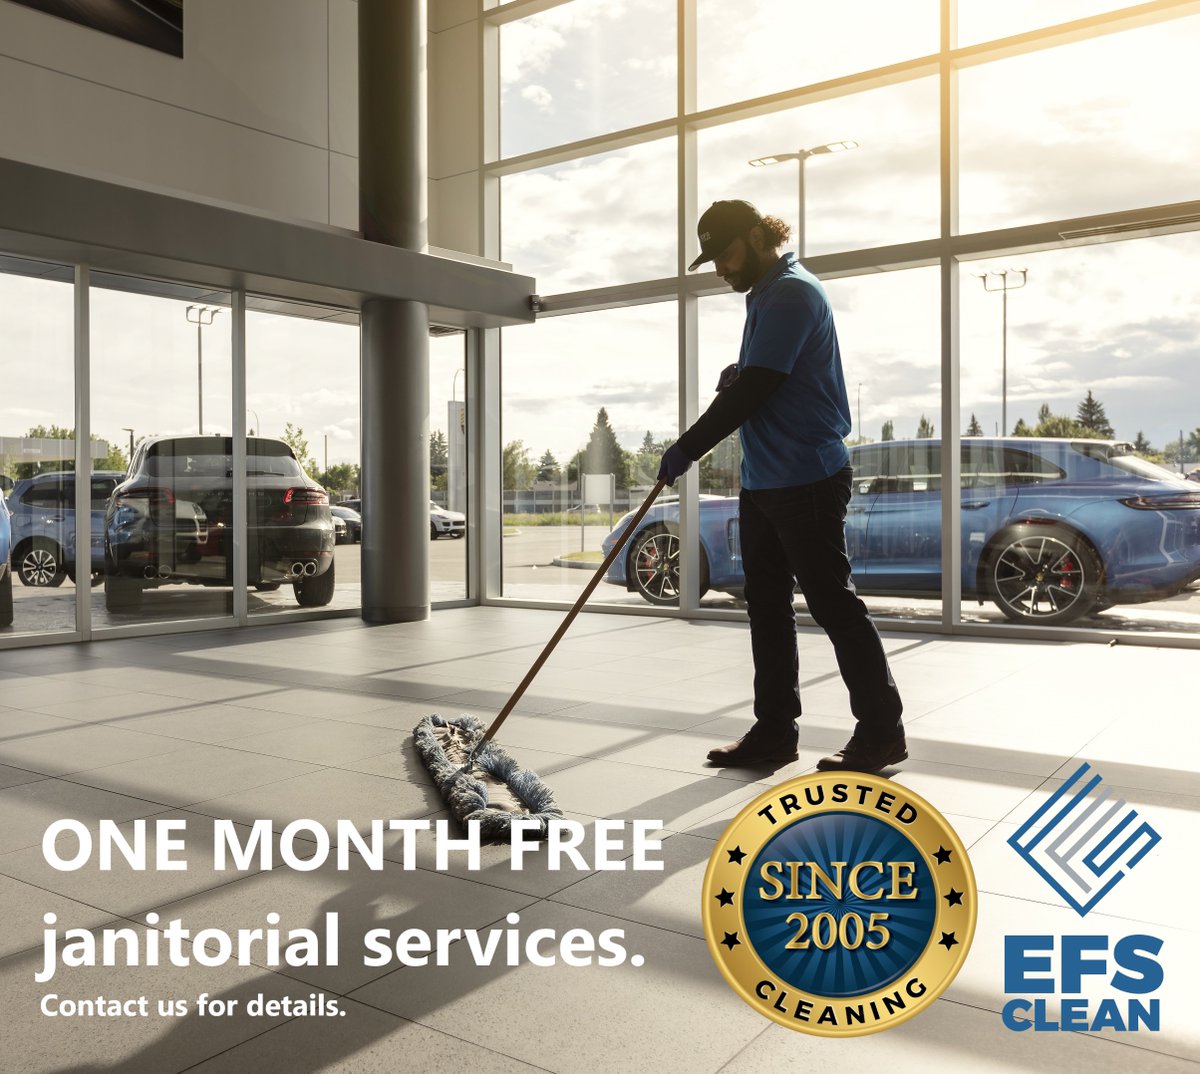 Looking for janitorial services? As us about this! #Calgary #cleaningservices #janitorialservices